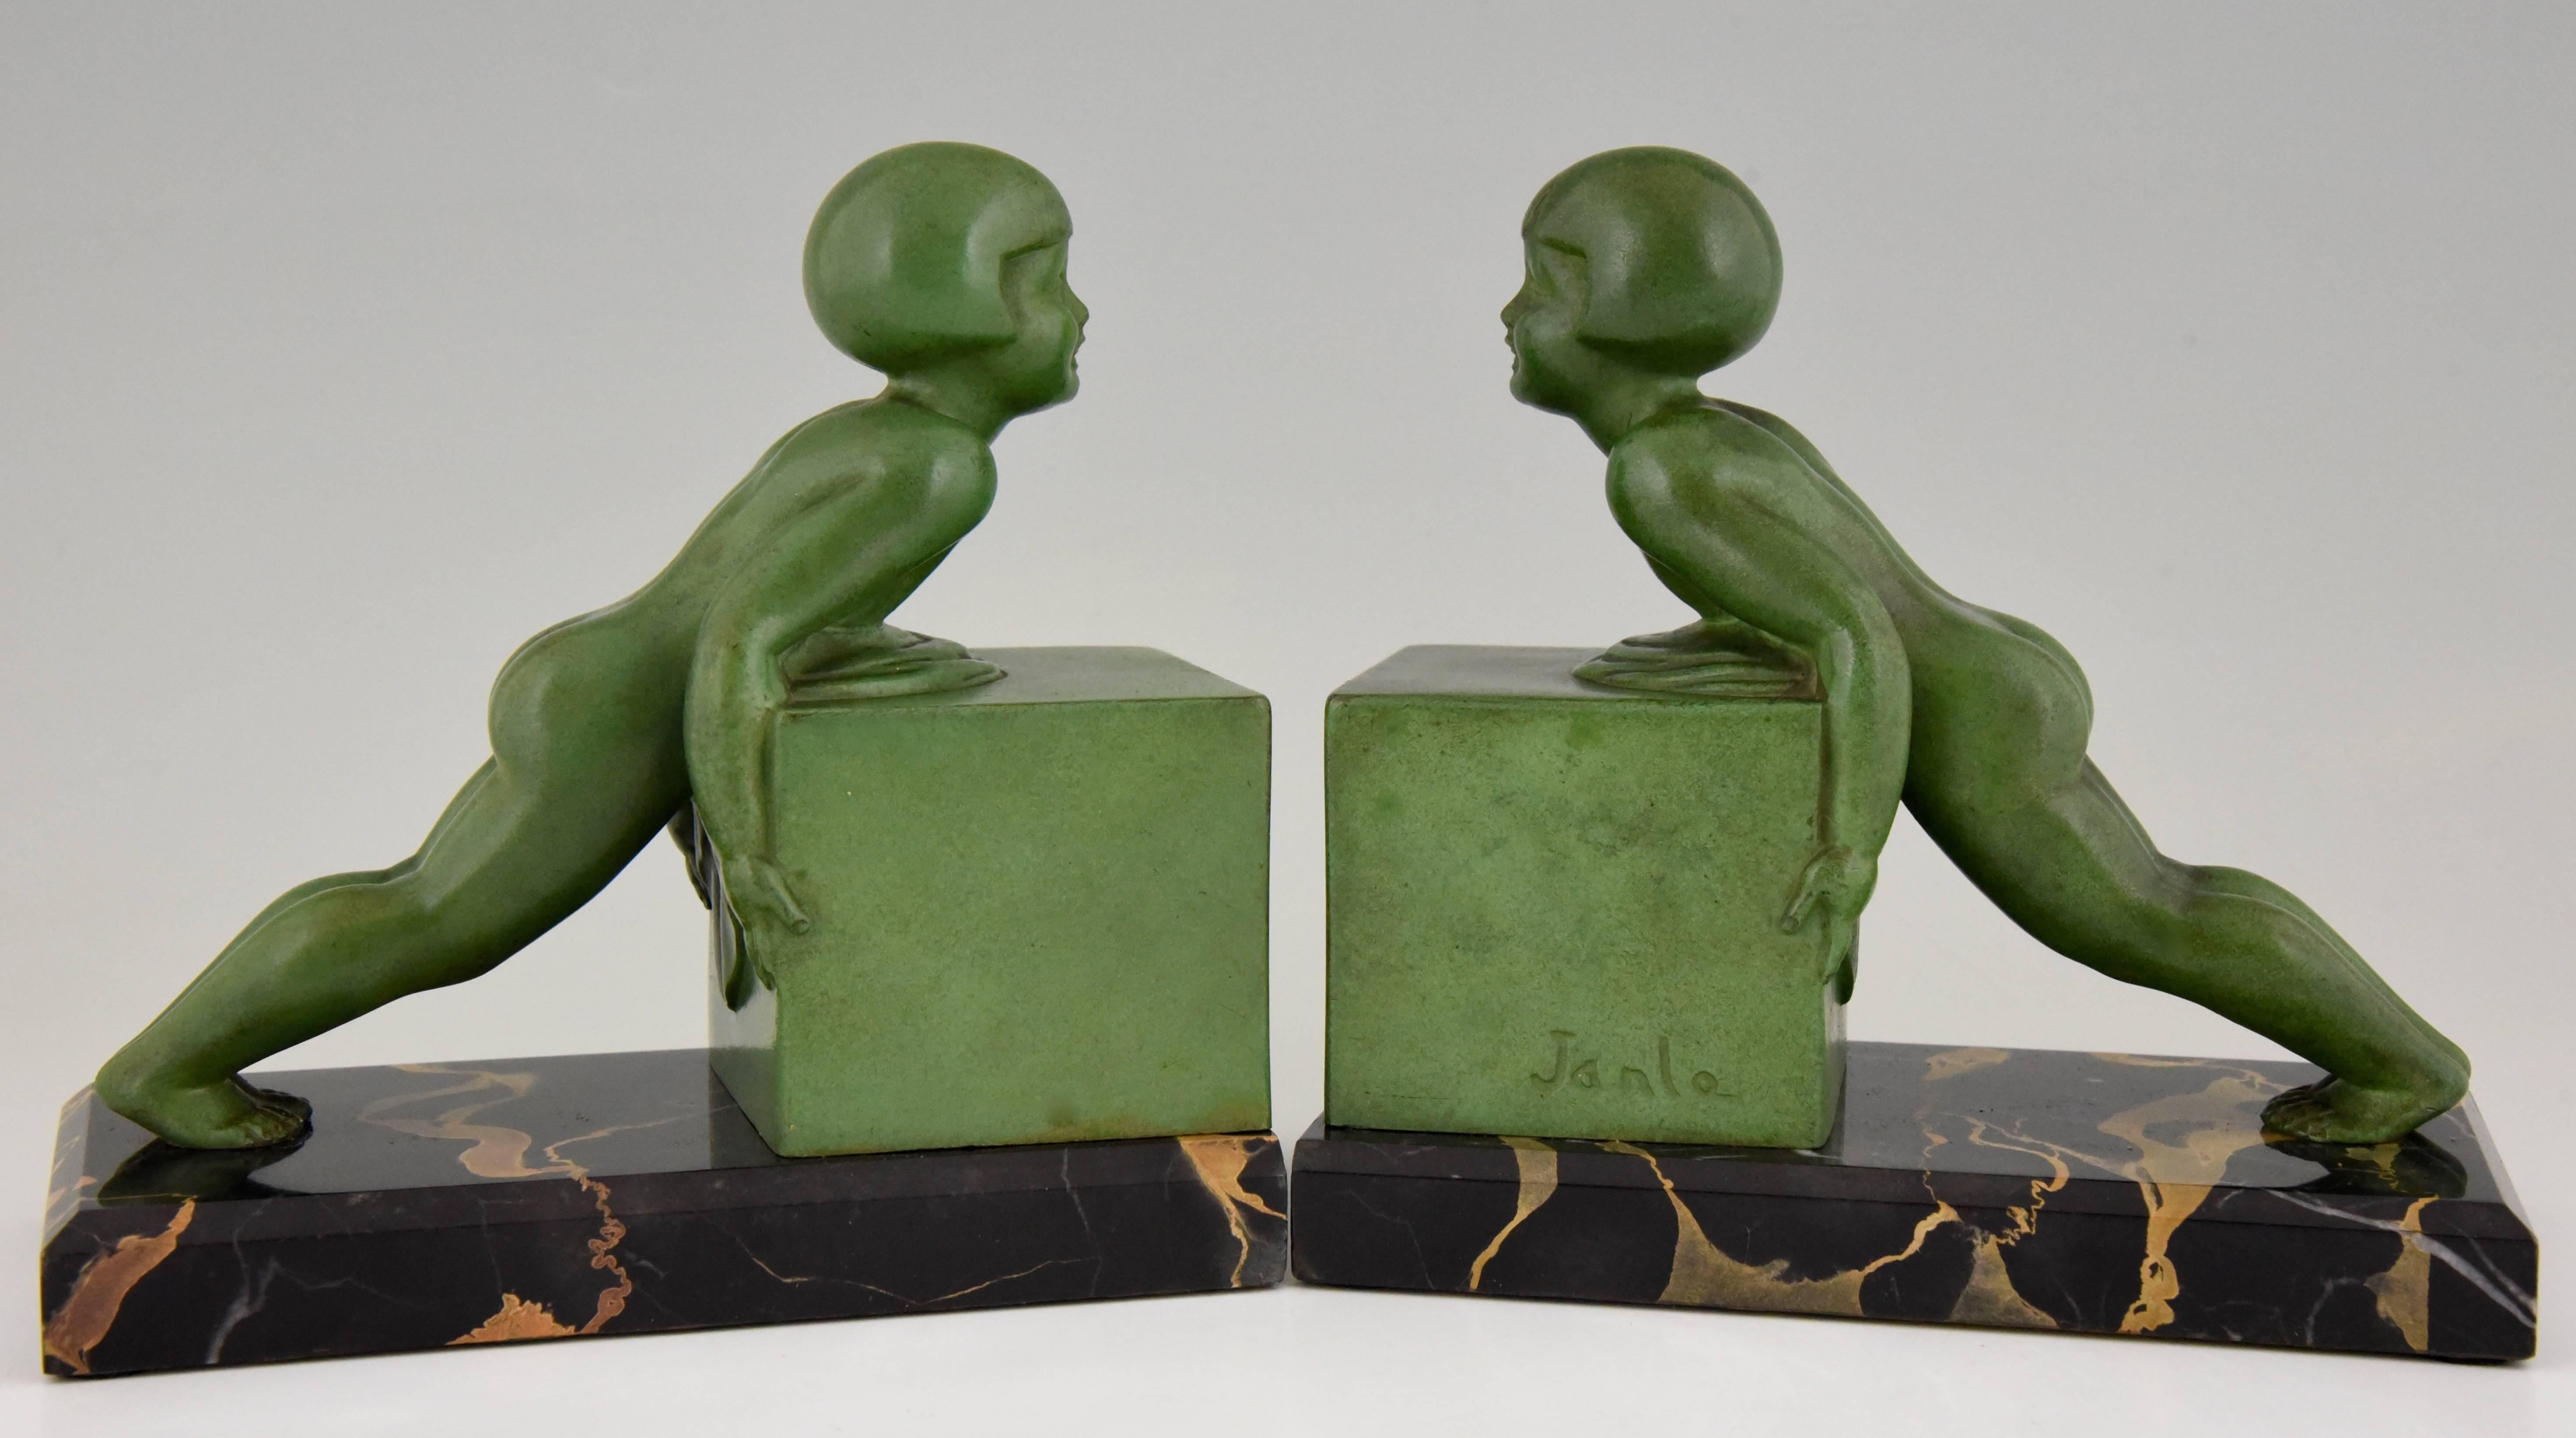 Signature/ Marks: Janle.
Style: Art Deco.
Date: 1930.
Material: Art metal with green patina. Portor marble base.
Origin: France.
Size: H 16.5 cm. x L 16.5 cm. x W 9 cm.  
H 6.5 inch x L 6.5 inch x W 3.5 inch
Condition: Excellent